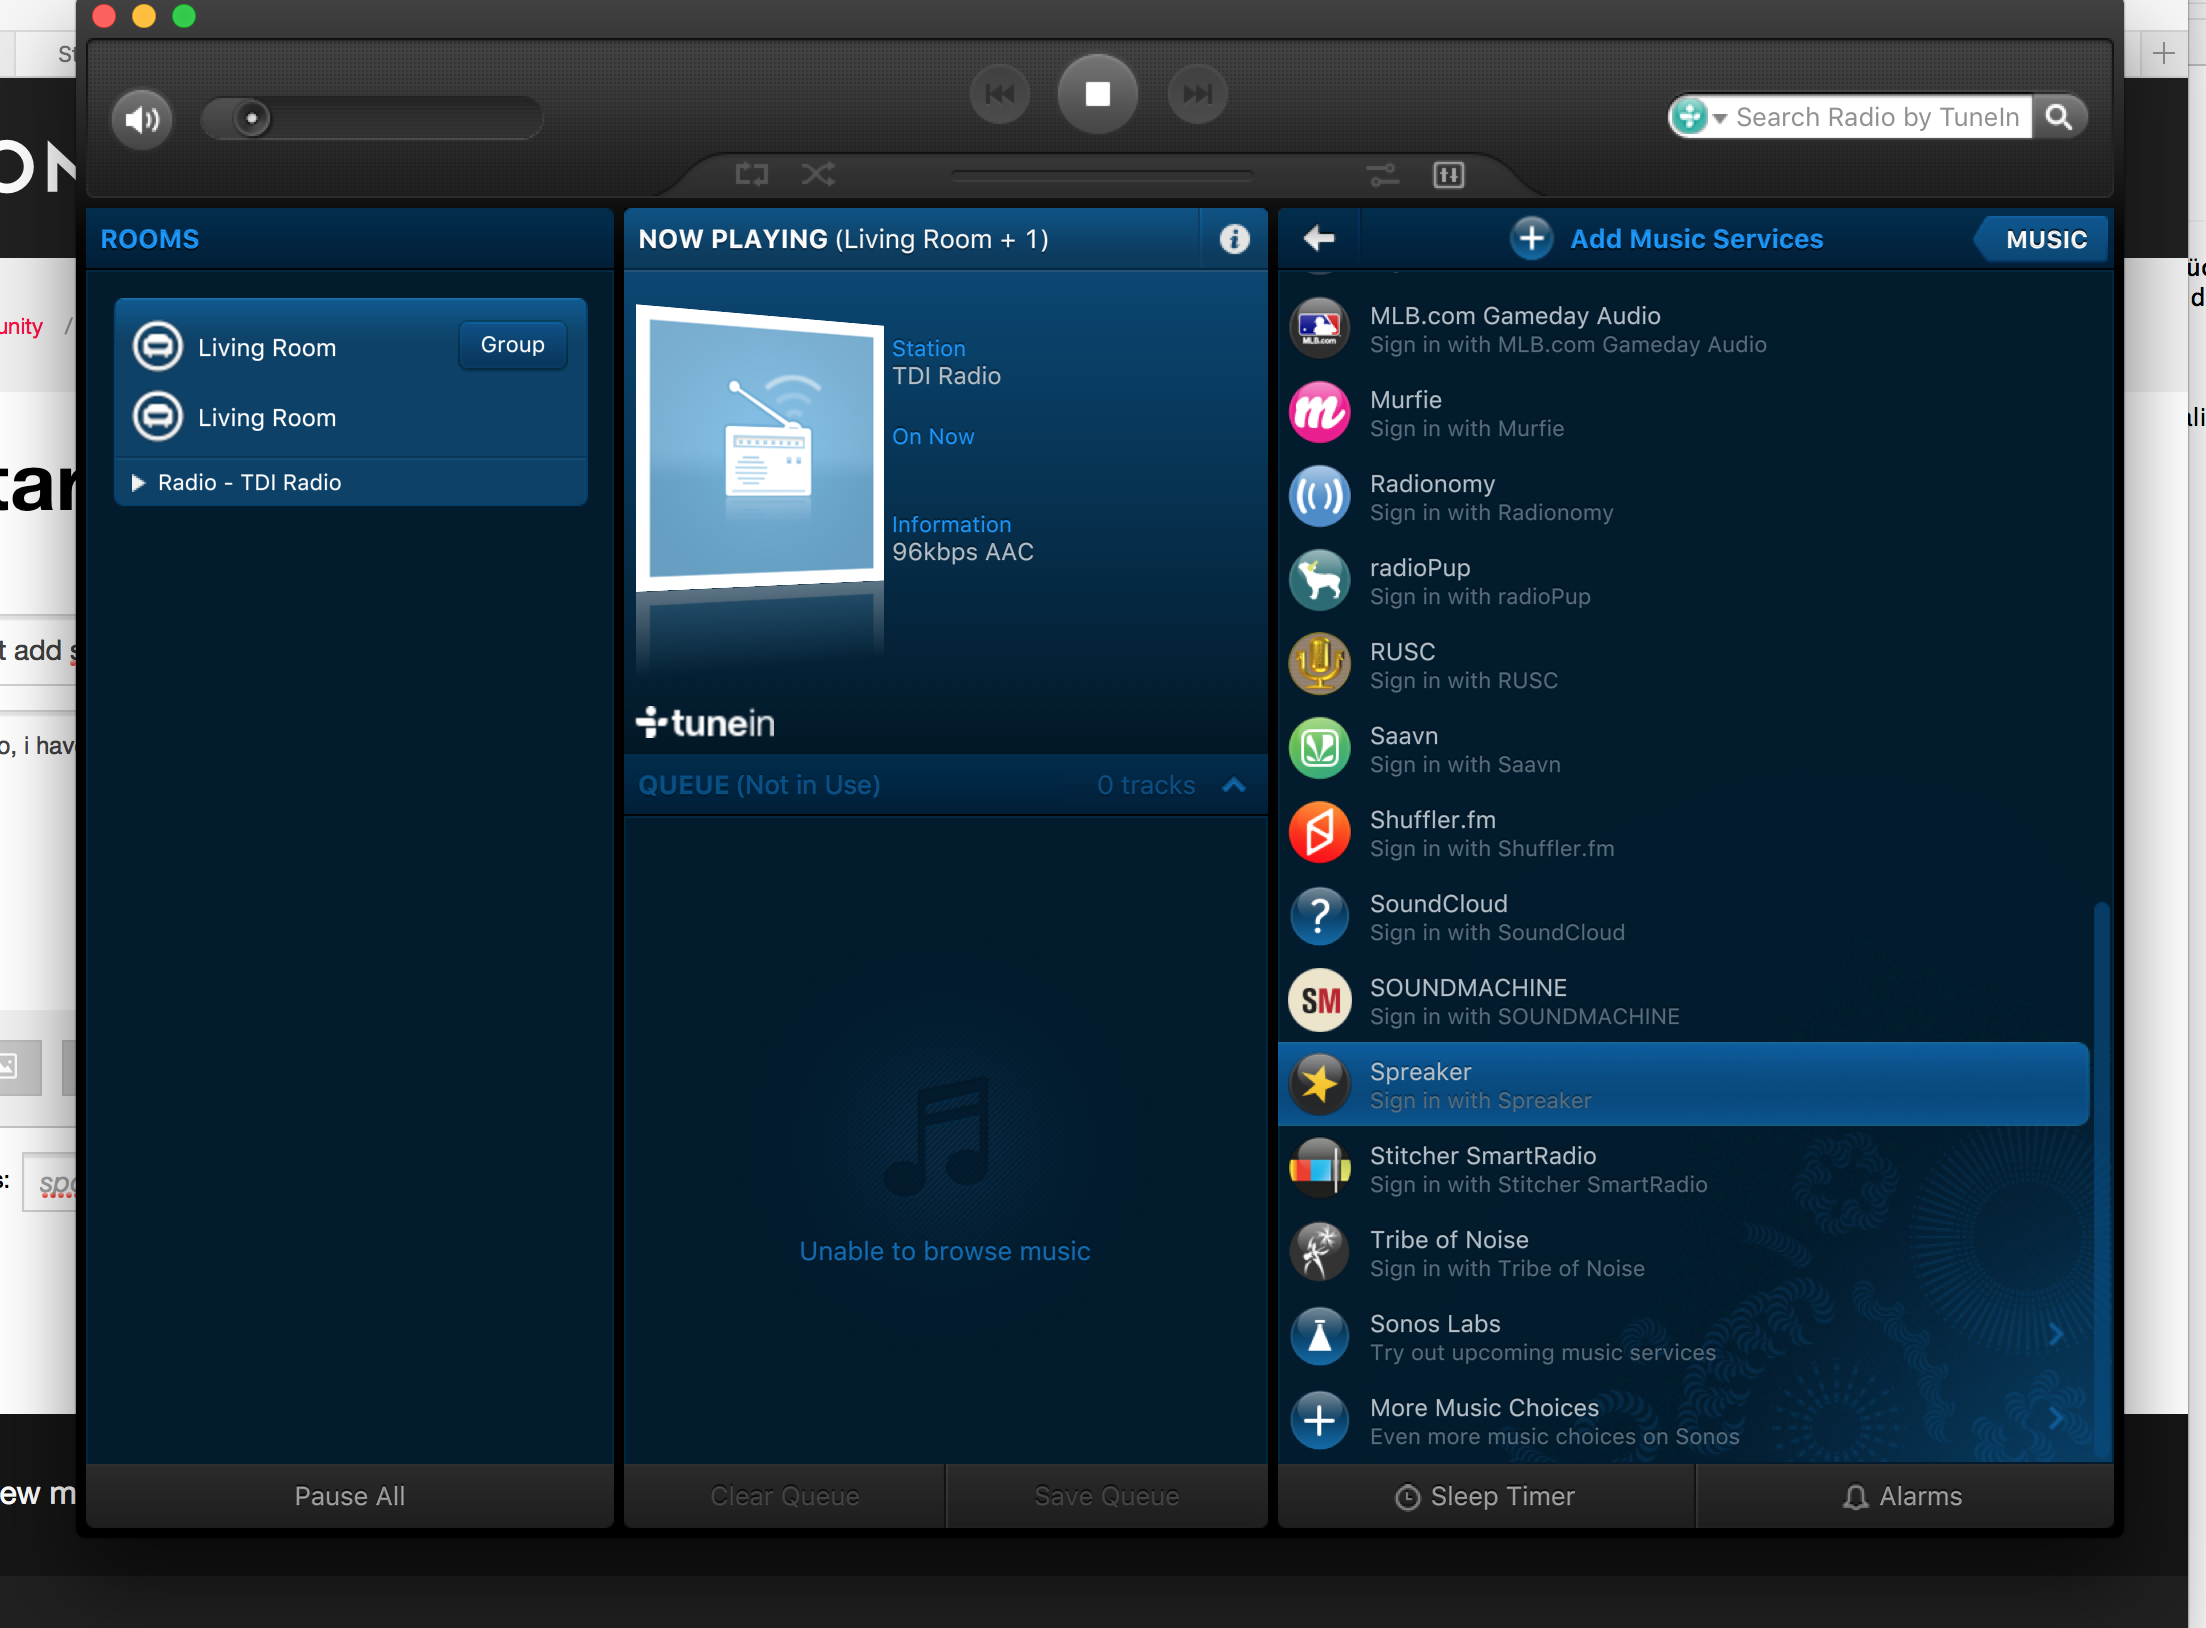 valgfri Windswept hæk cant add spotify in the sonos app on IOS and OSX | Sonos Community